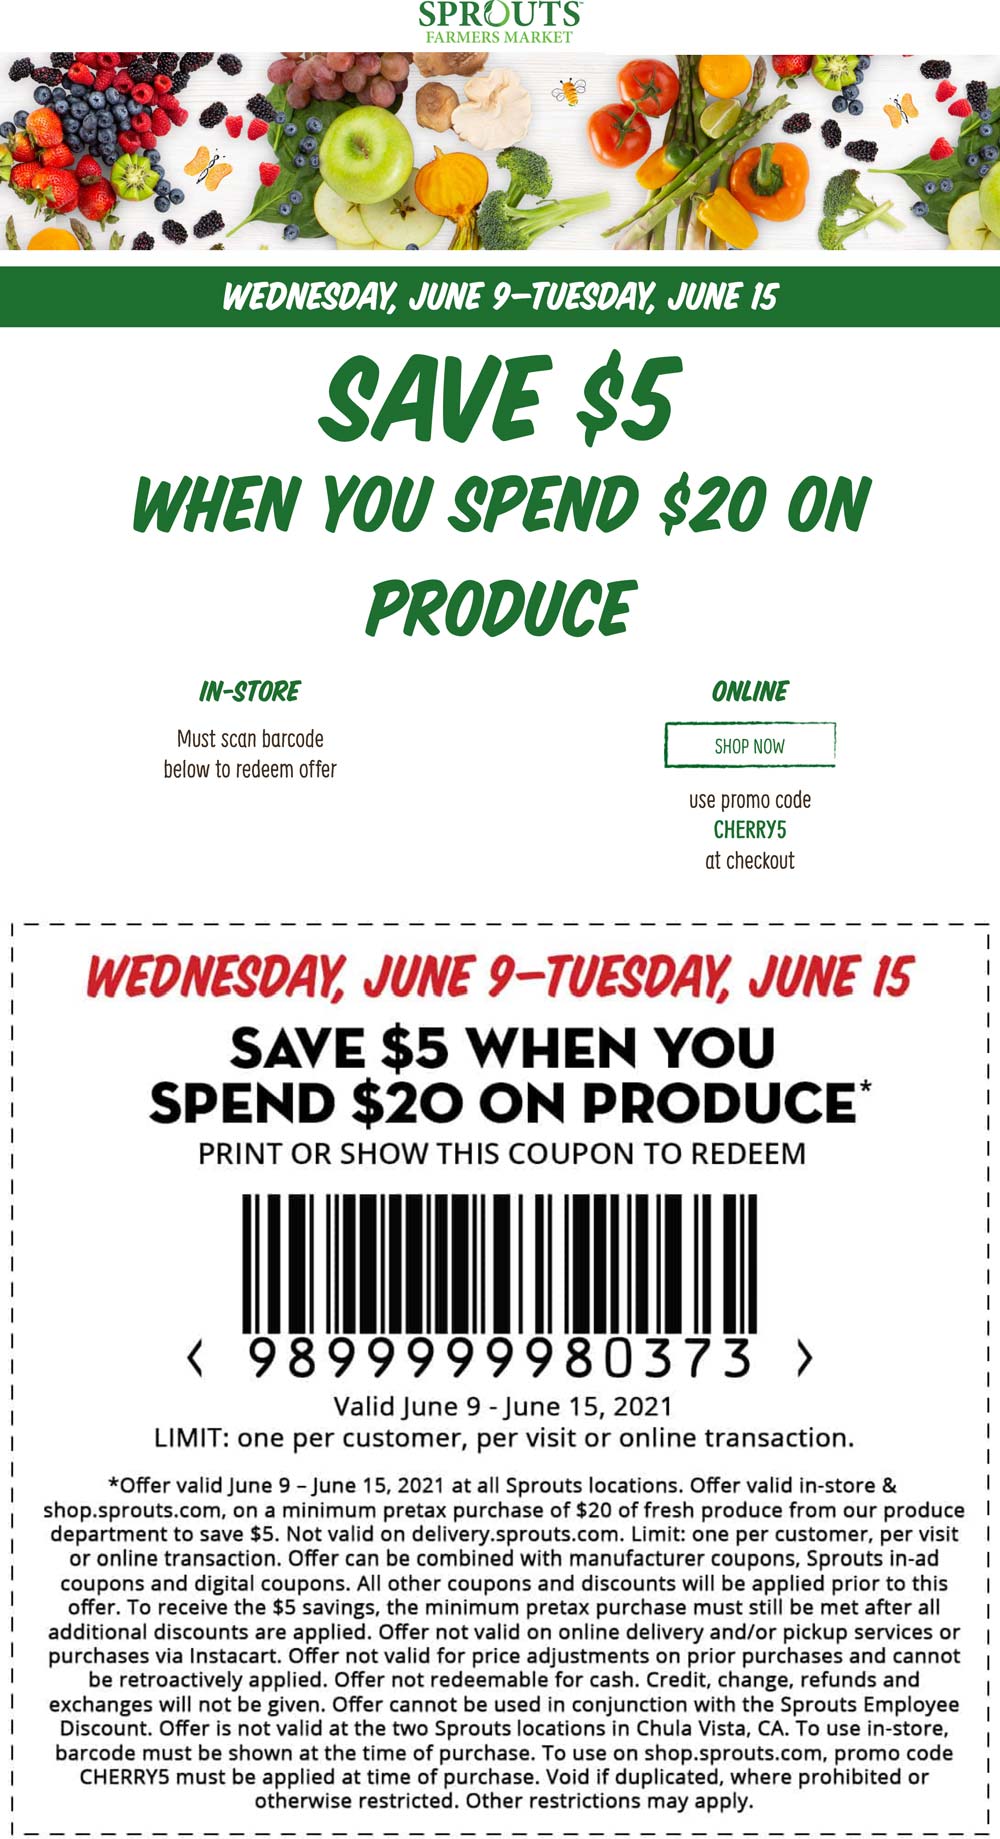 Sprouts stores Coupon  $5 off $20 on produce at Sprouts Farmers Market grocery #sprouts 